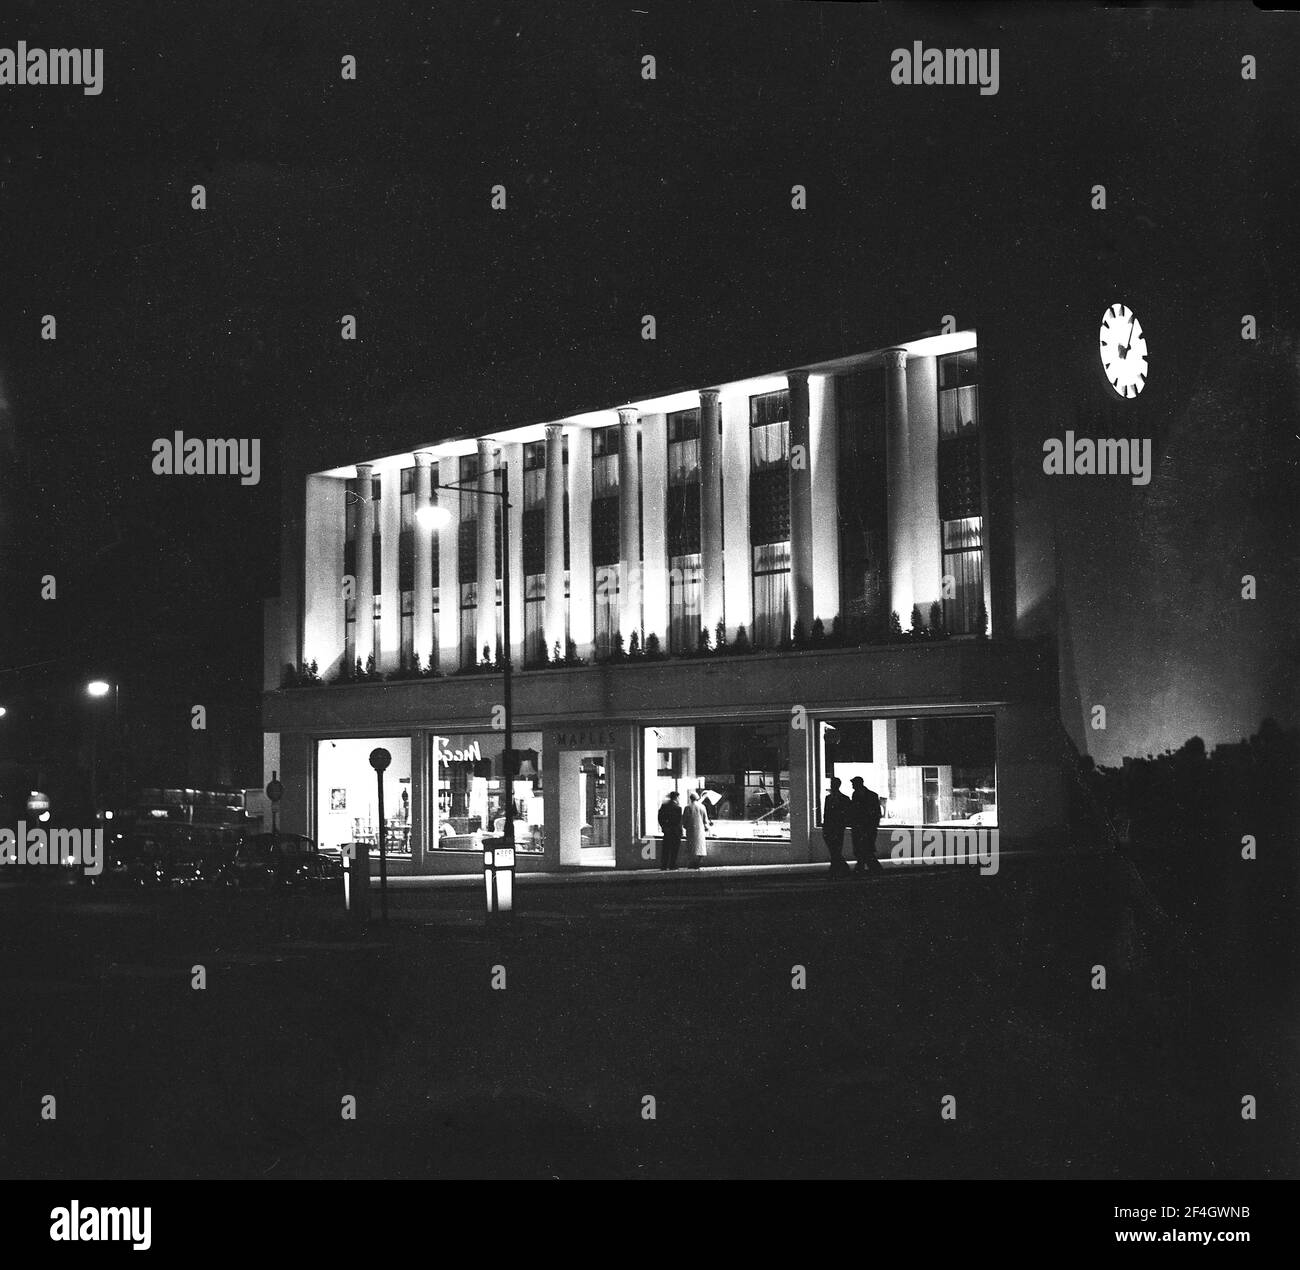 1956, historical, eveningtme and the exterior of the Maples furniture store, The Triangle, Clifton, Bristol, England, UK lit up, newly built from the bomb damaged city of WW2. Stock Photo